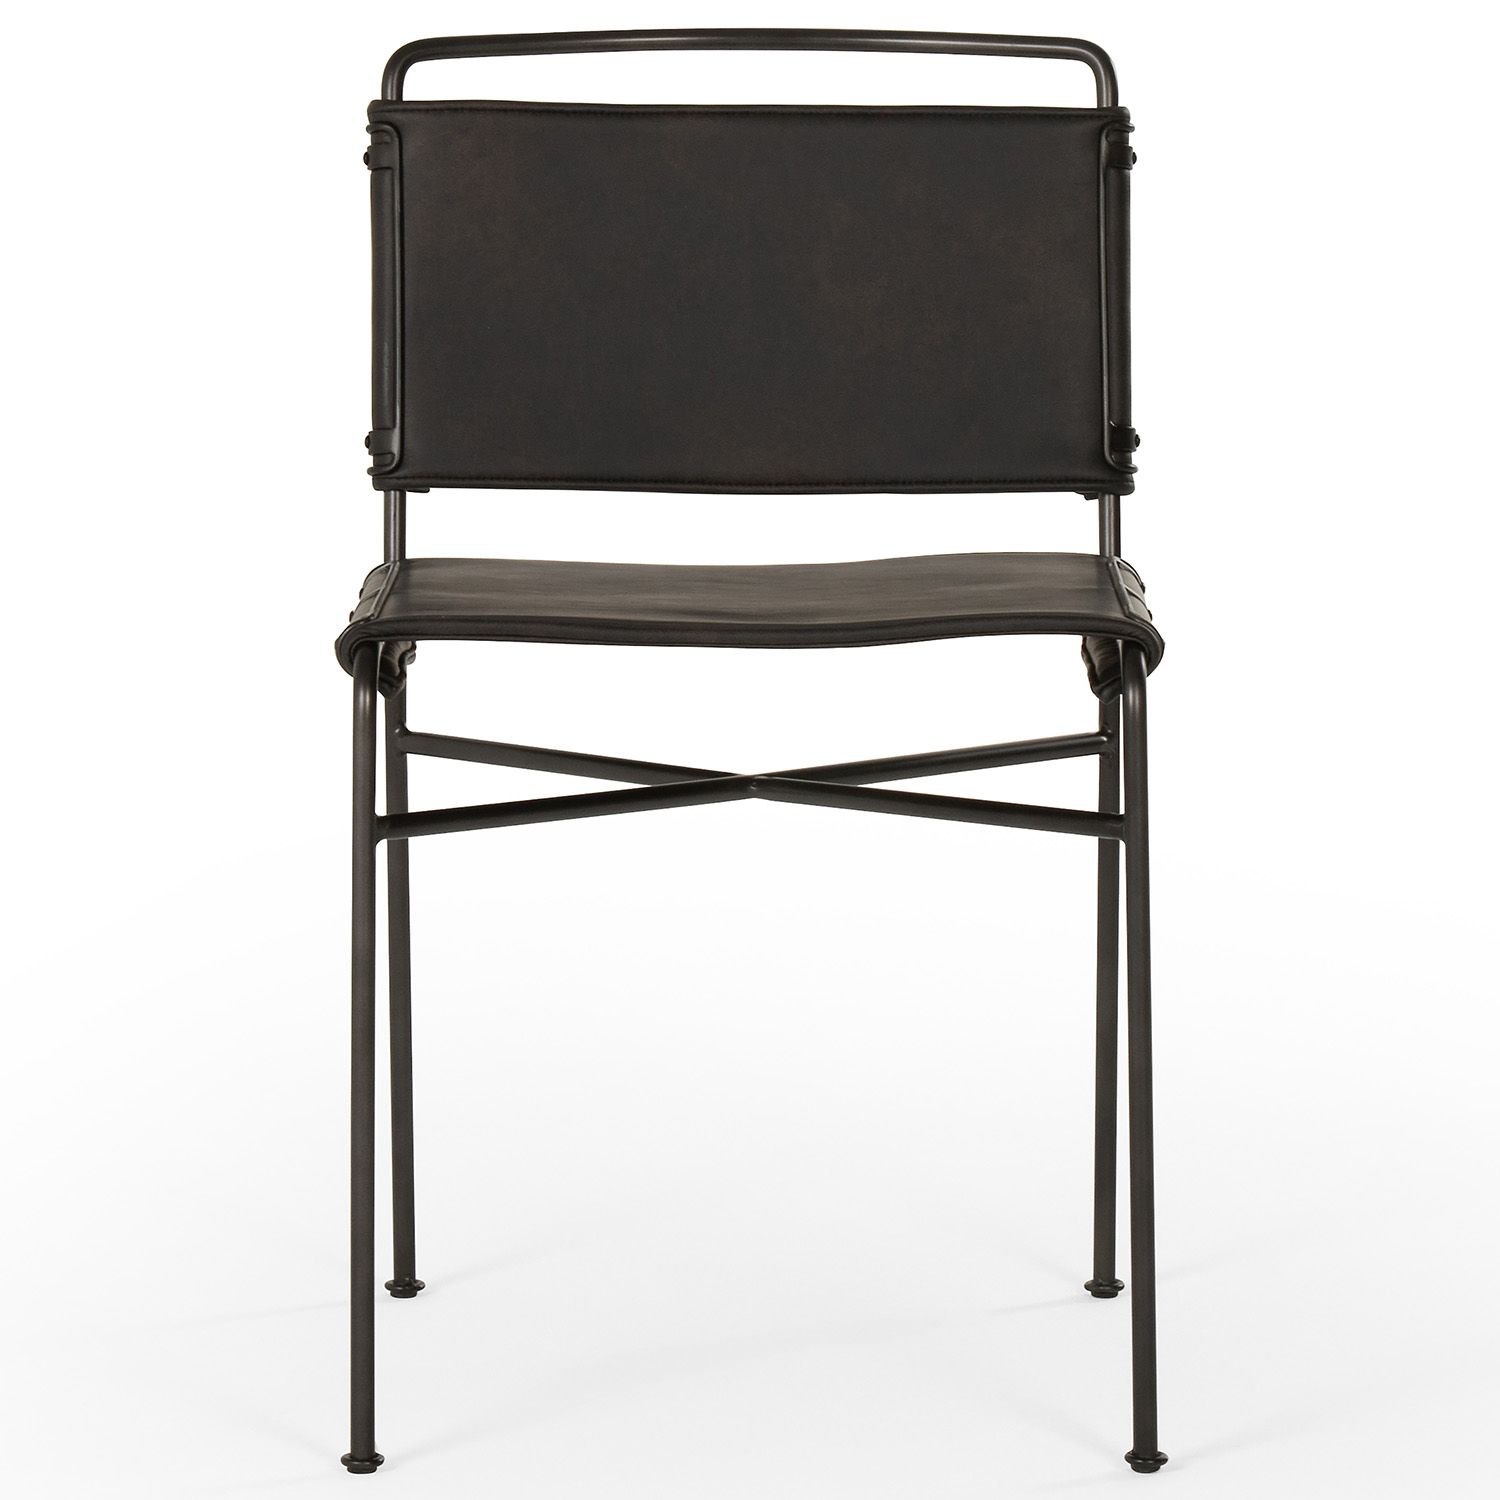 Oxton Industrial Loft Black Seat Iron Frame Dining Side Chair | Kathy Kuo Home